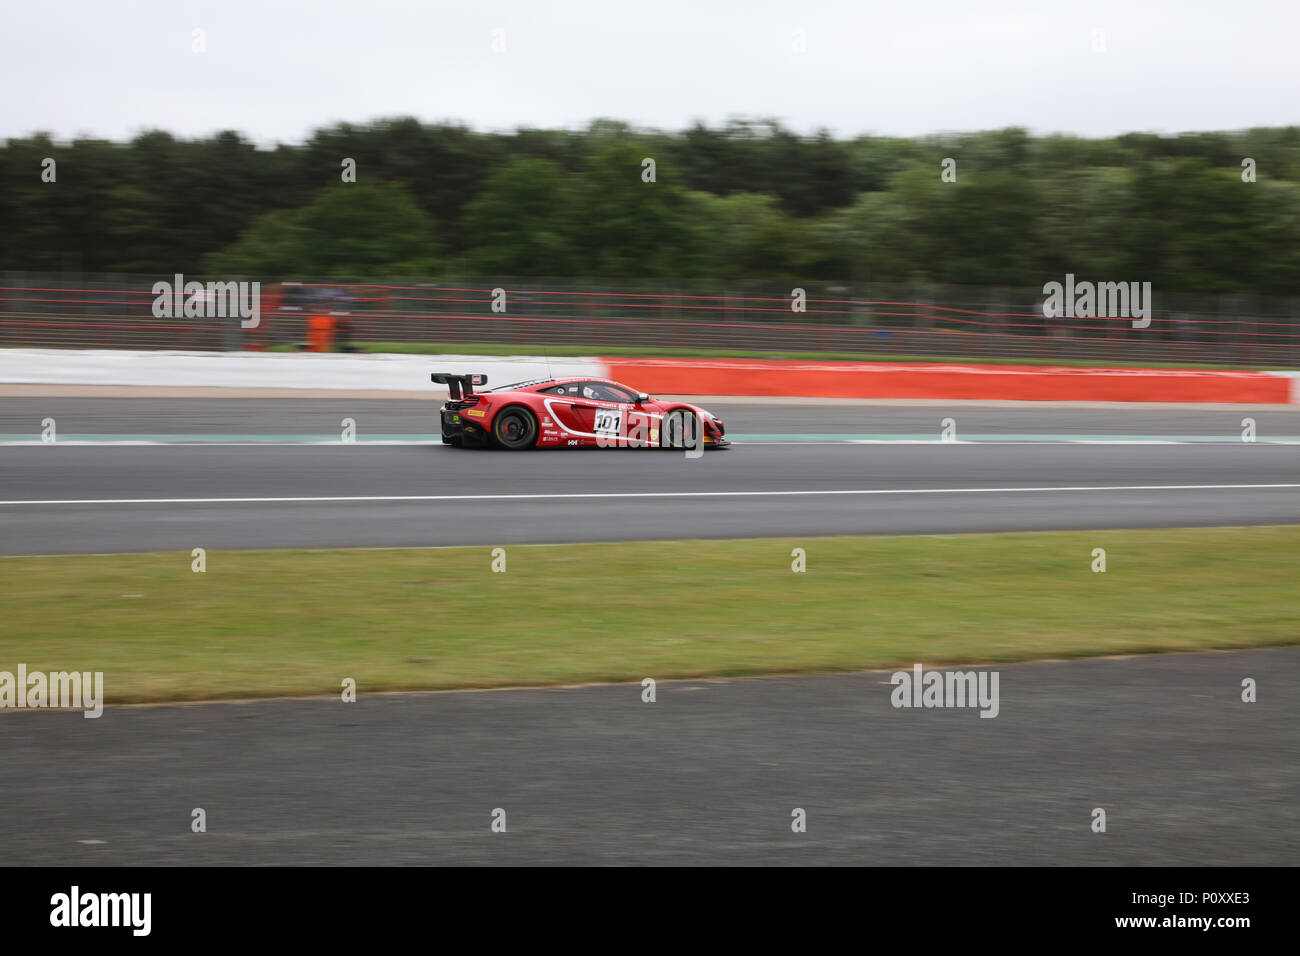 Silverstone, United Kingdom. 10th Jun, 2018. The McLaren 101 car of Shaun Balfe and Rob Bell on circuit for the British GT Warmup session Credit: Paren Raval/Alamy Live News Stock Photo